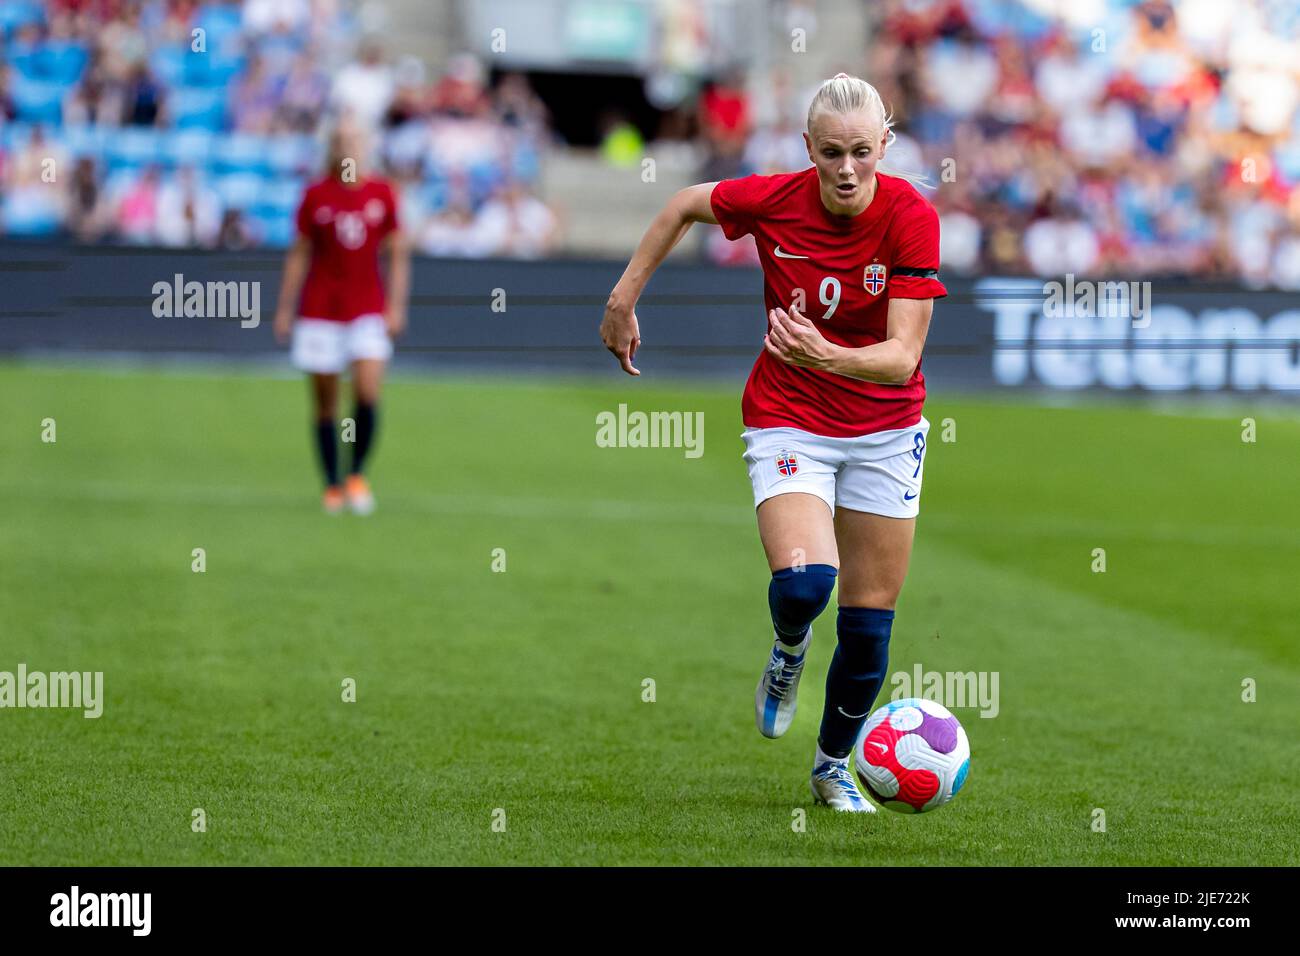 Oslo, Norway 25 June 2022, Vilde Hamsund of Norway in action during the international football friendly match between Norway women and New Zealand women at the Ullevaal Stadion in Oslo, Norway. credit: Nigel Waldron/Alamy Live News Stock Photo